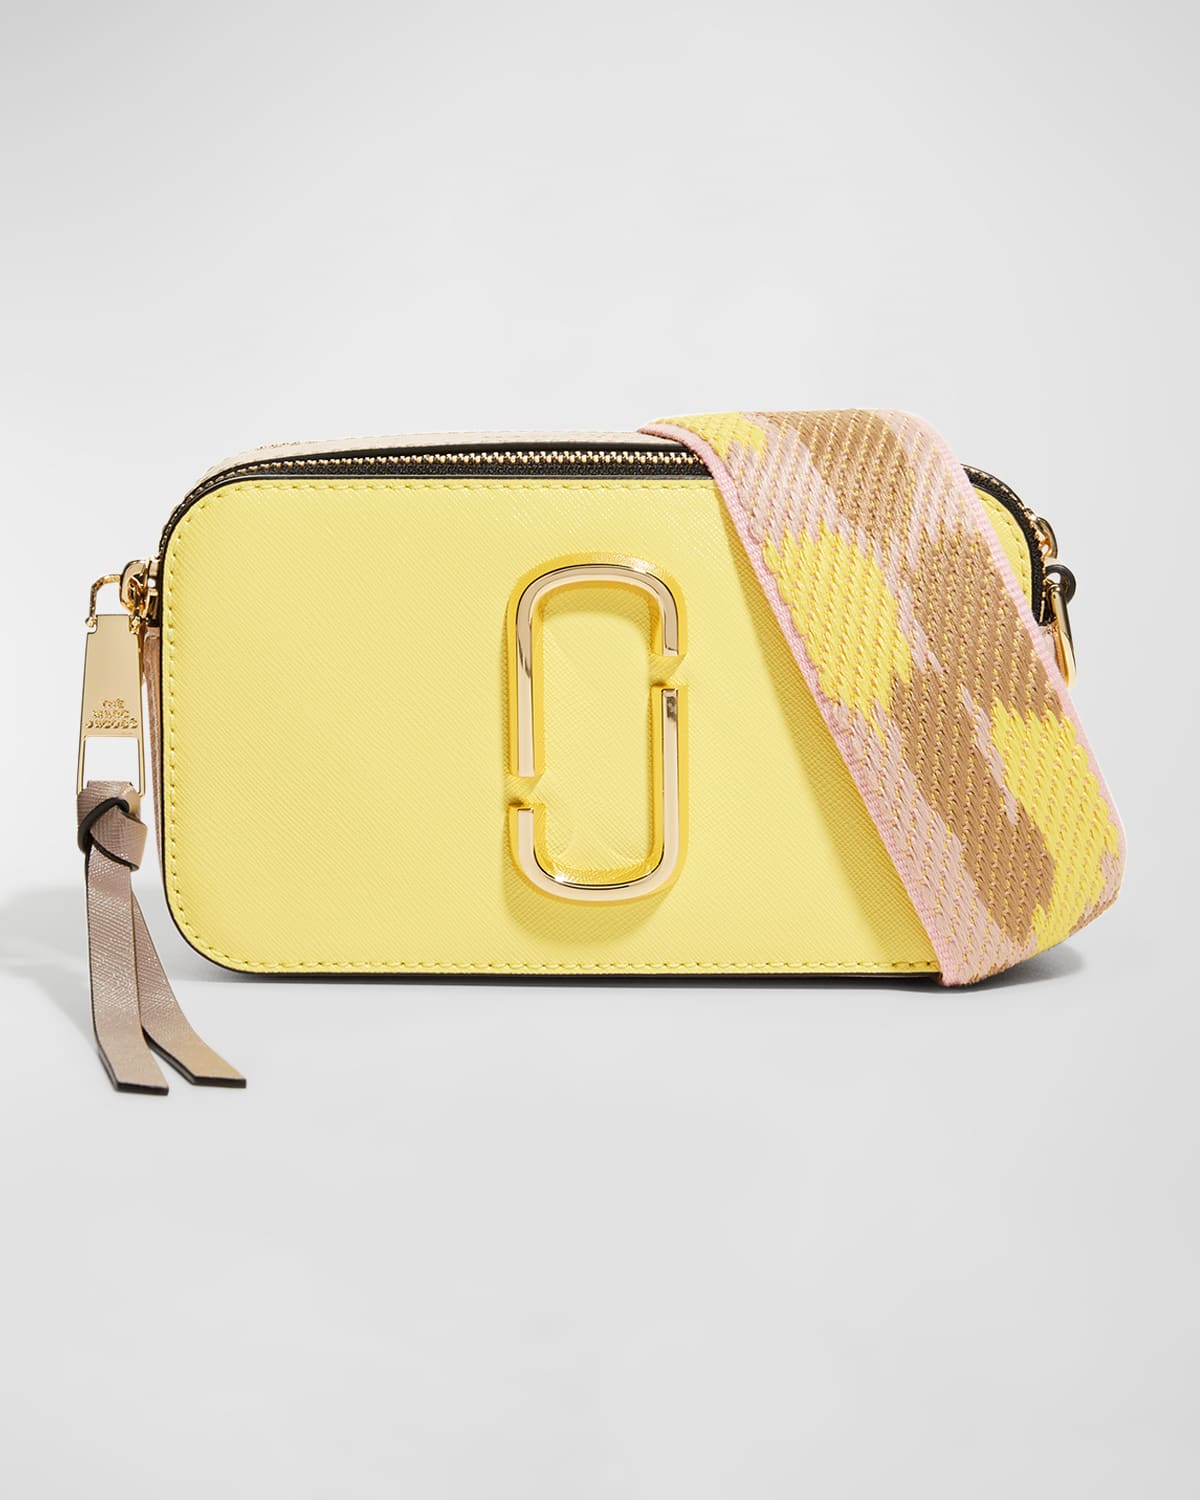 MARC JACOBS (THE) Marc Jacobs The Colorblock Snapshot Camera Bag - Stylemyle